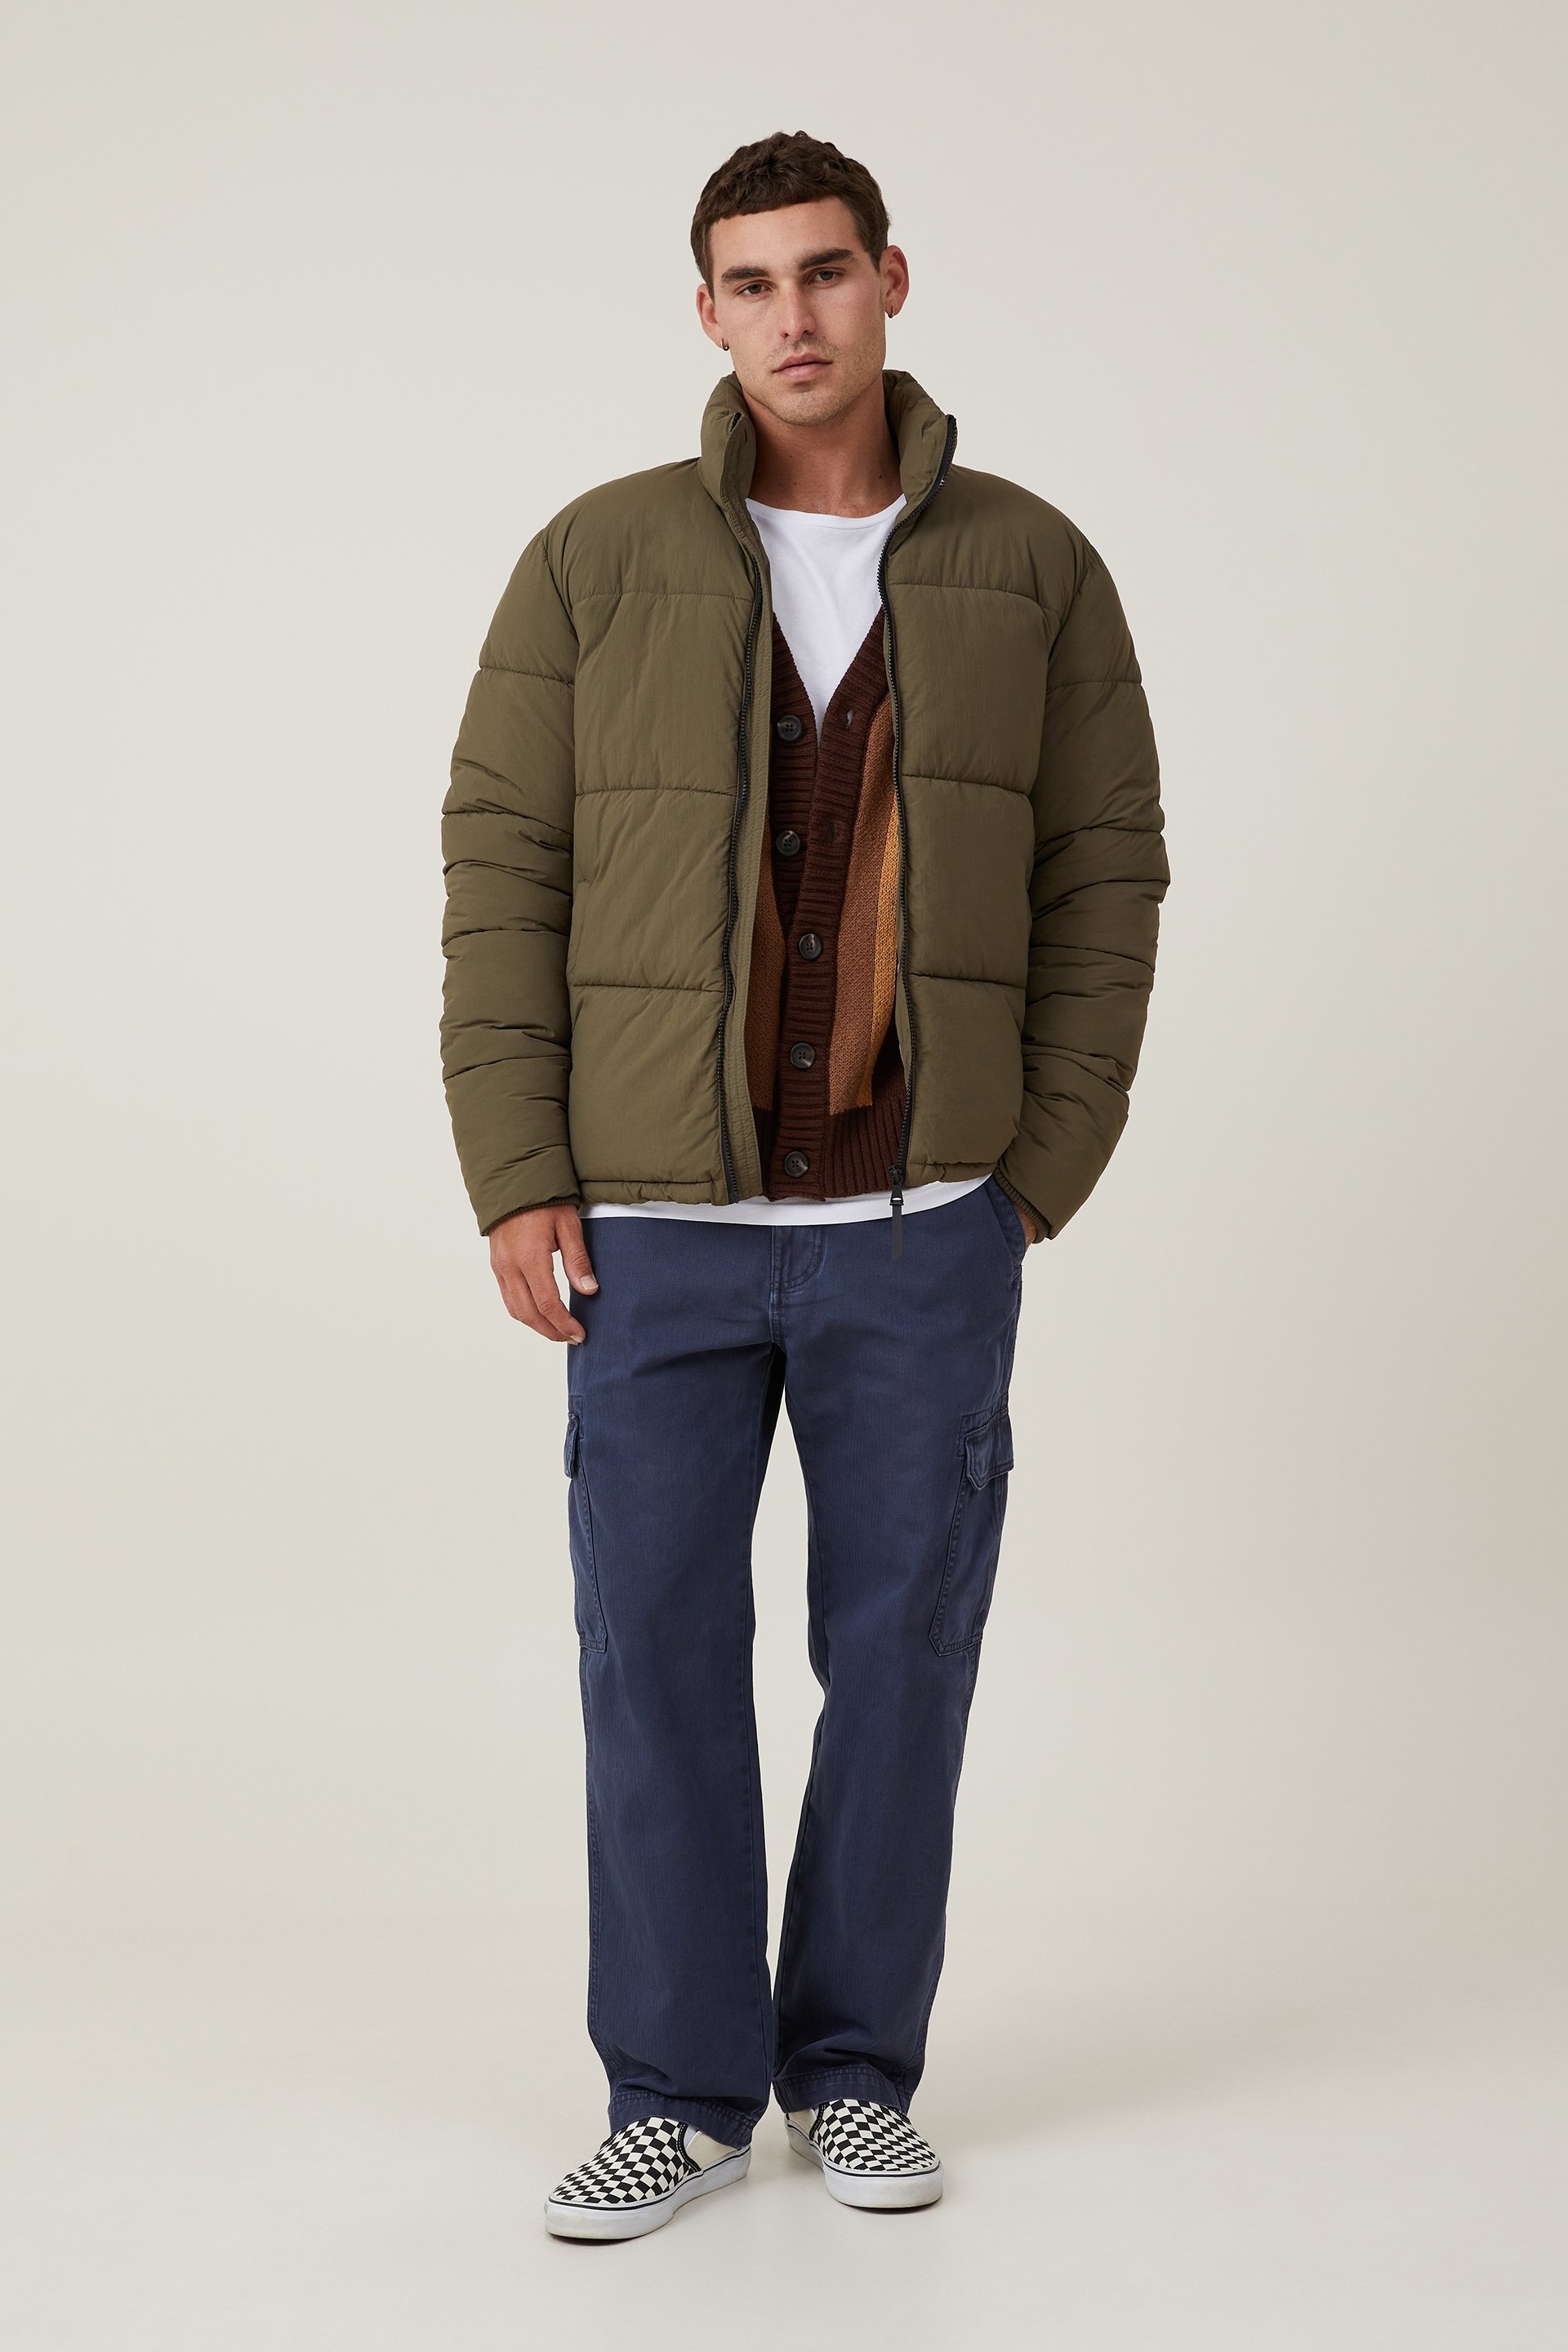 Cotton On Men - Recycled Puffer Jacket - Army